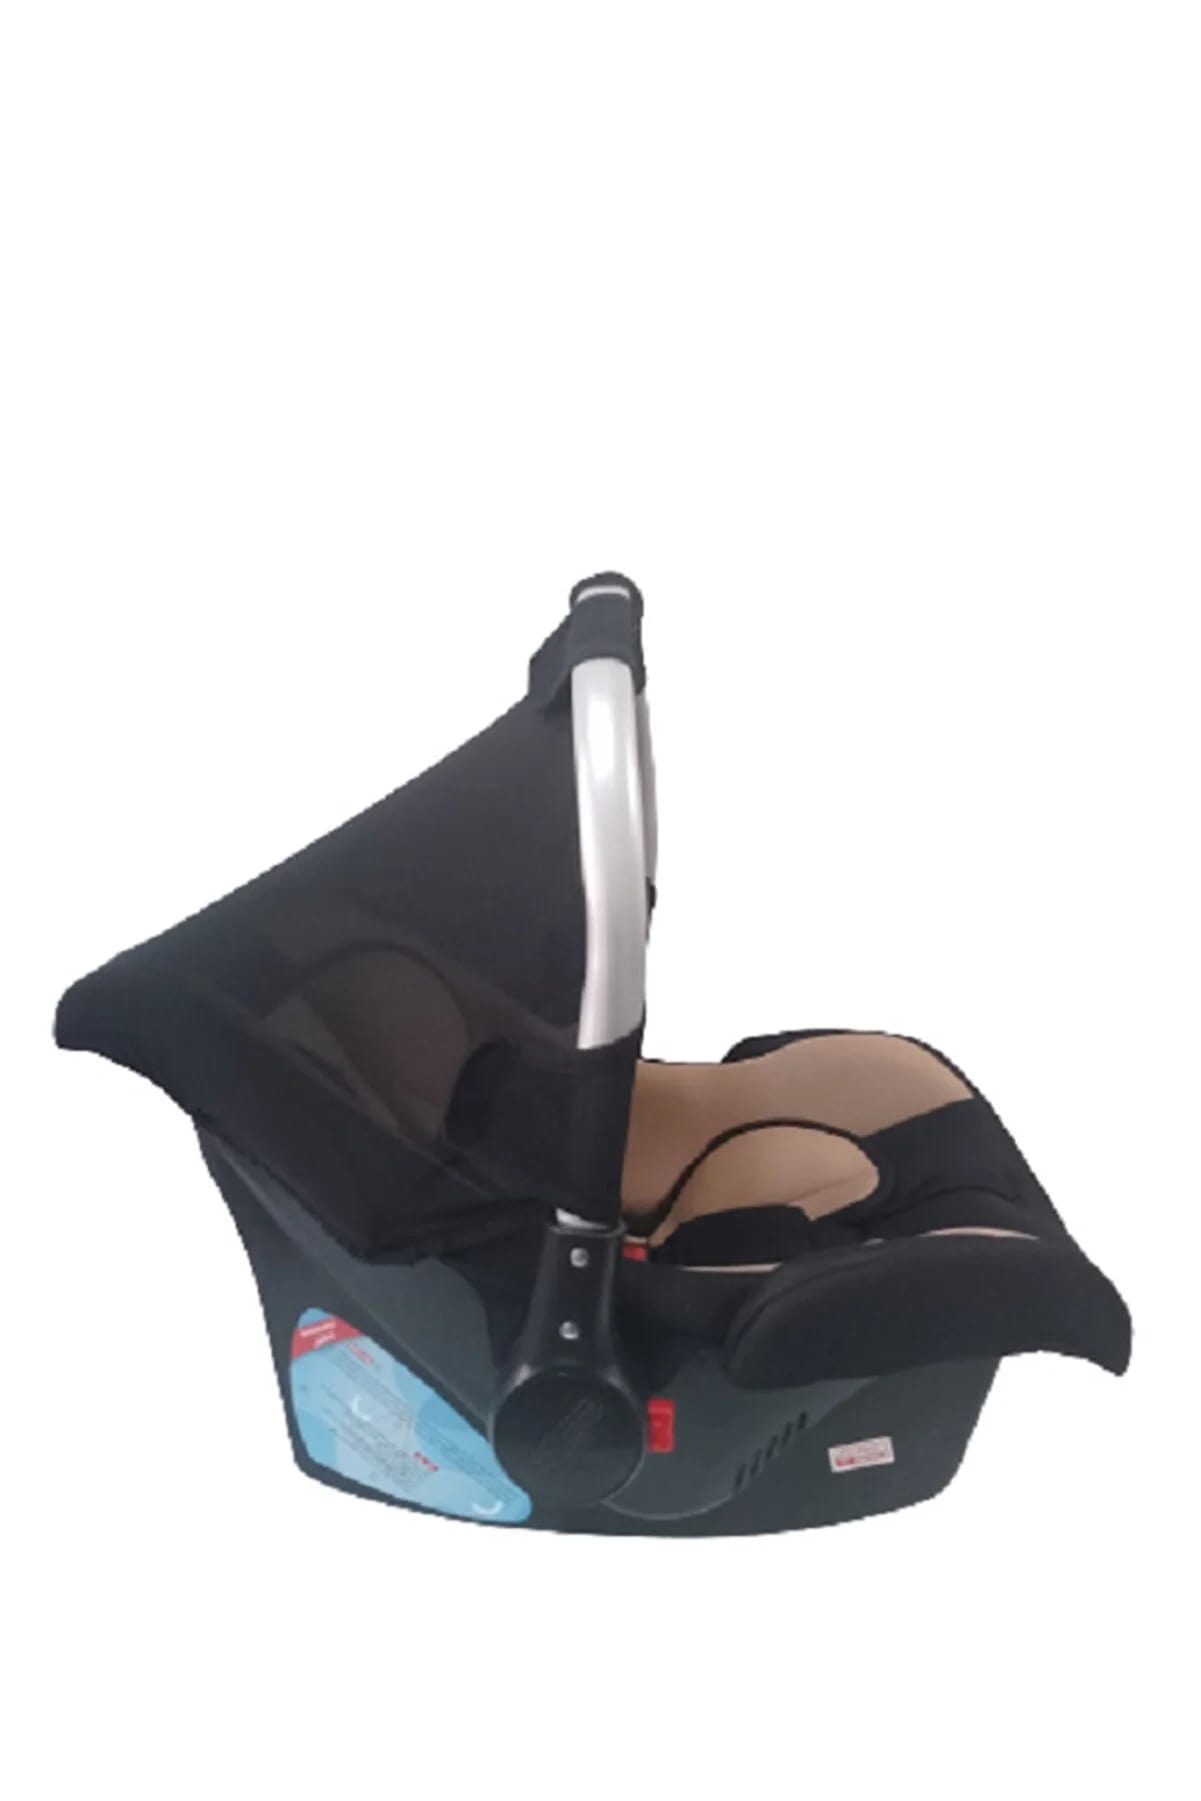 Maller Pedro Carry Chair and Carrier Brown and black